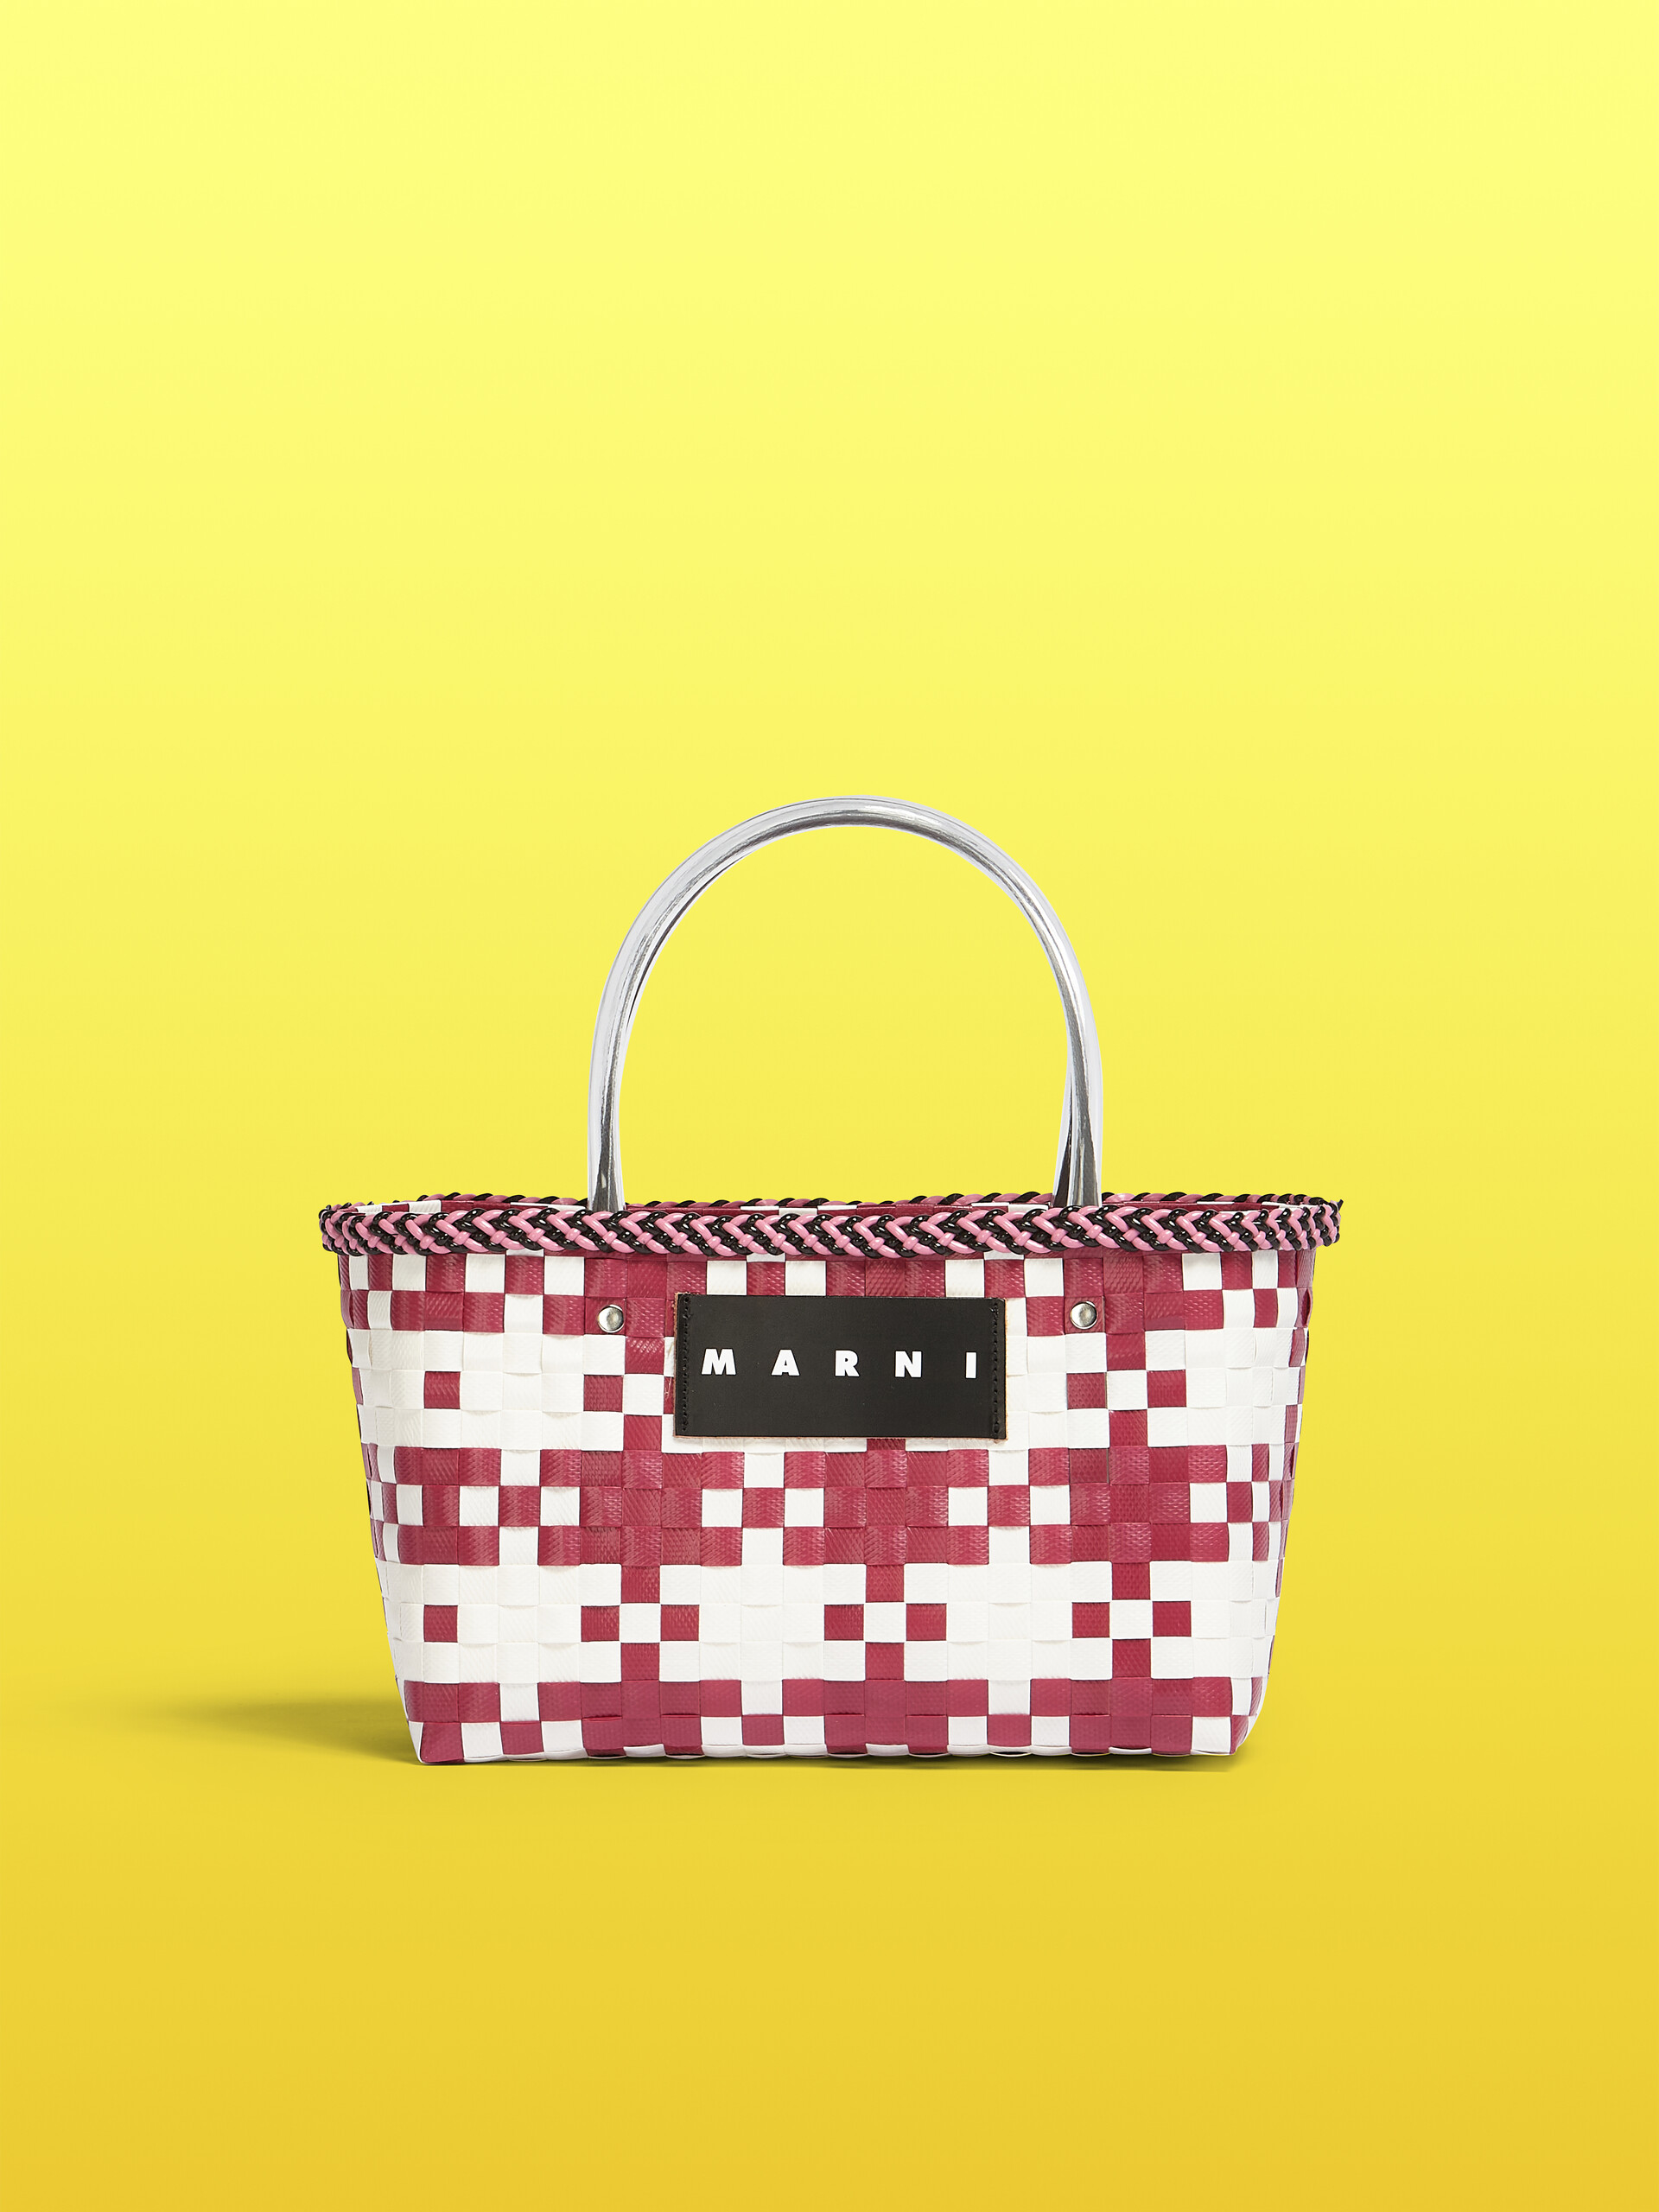 MARNI MARKET CHECK BAG in red and white tartan woven material - Shopping Bags - Image 1